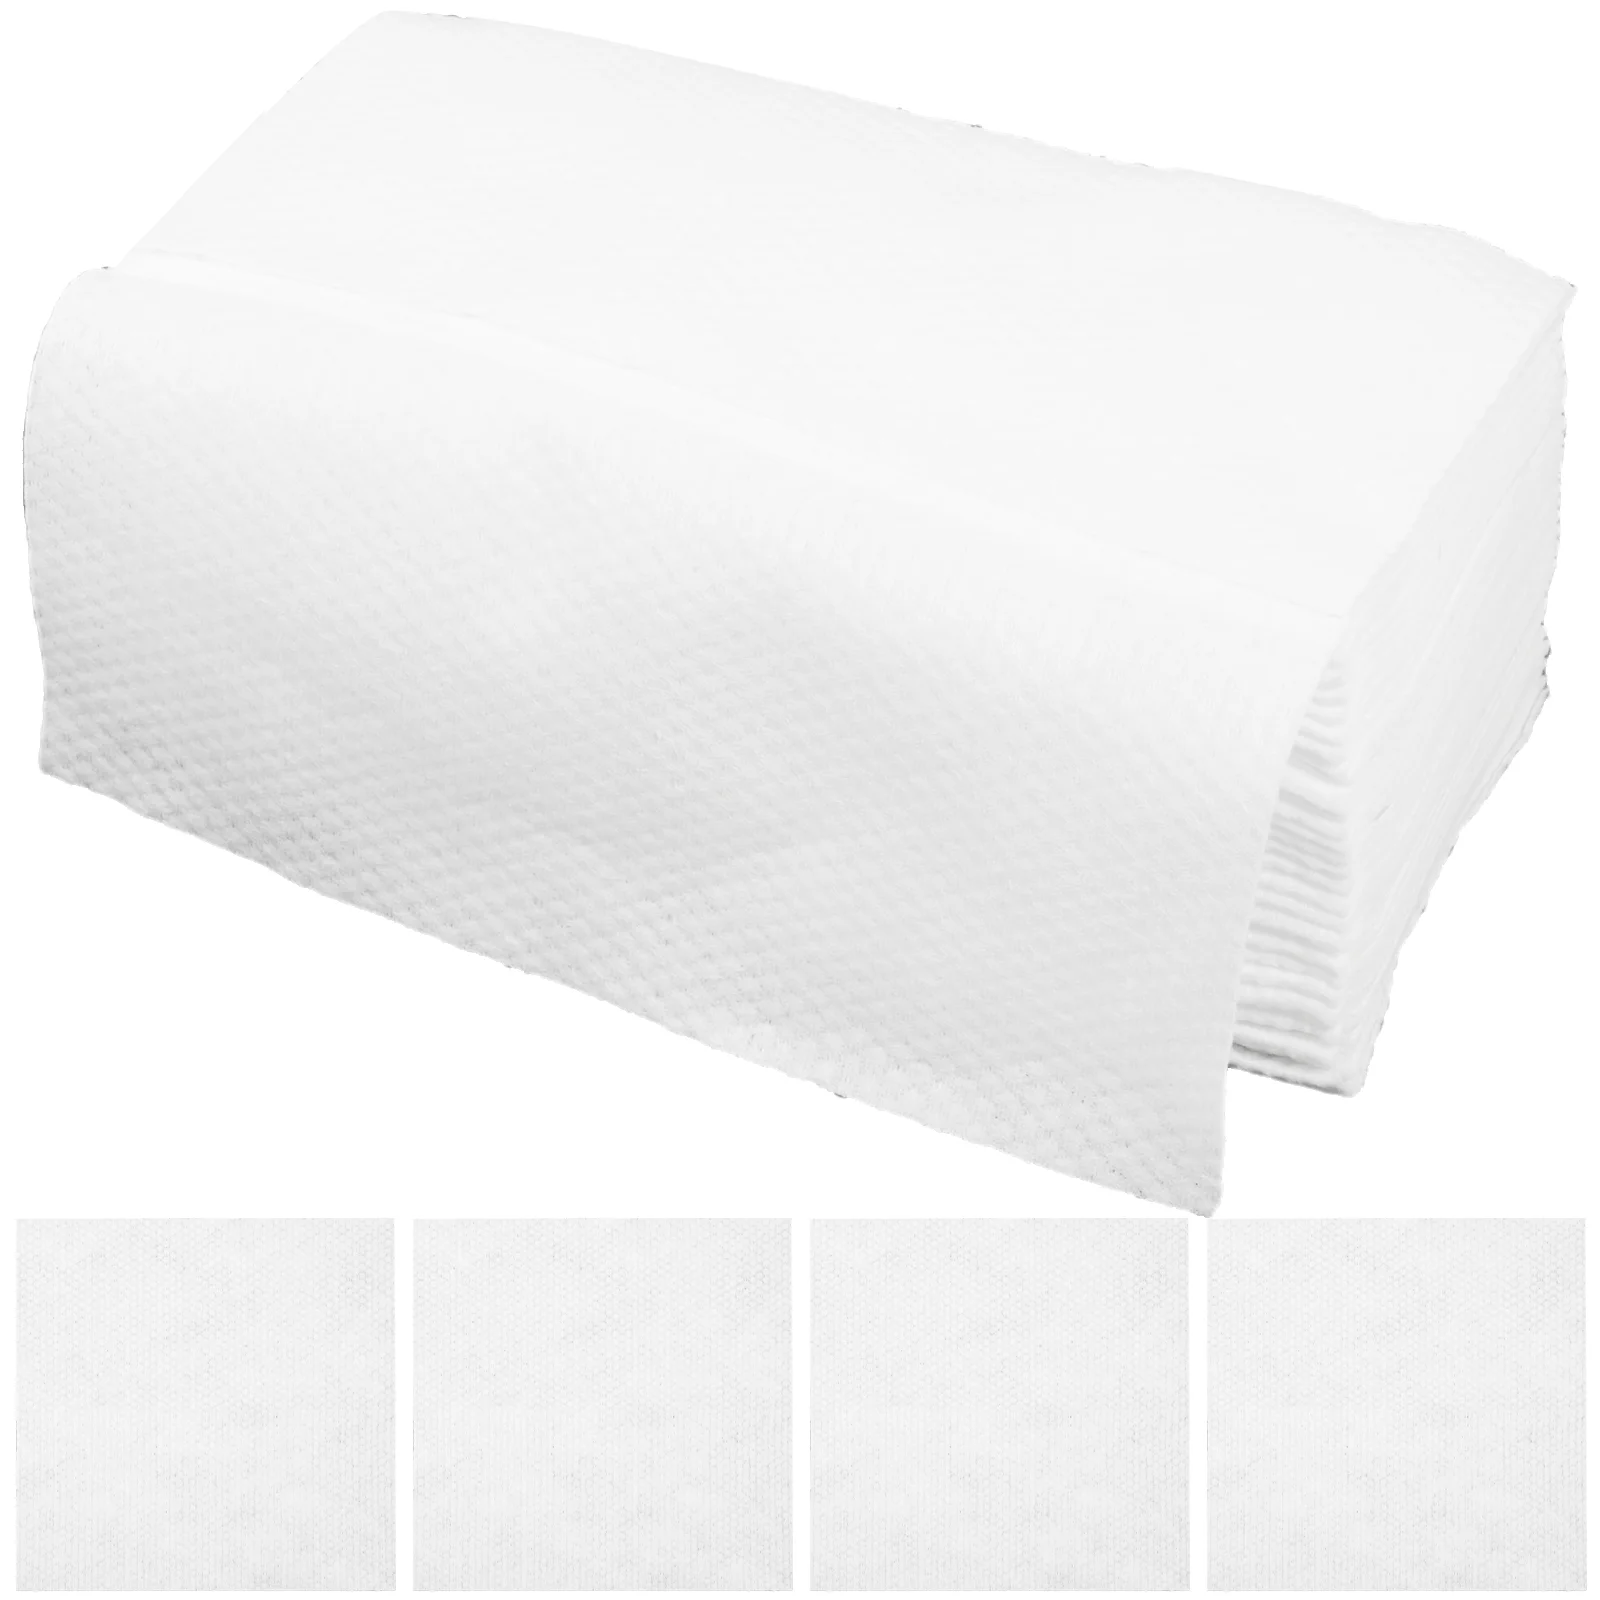 

Towel Disposable Paper Napkins Face Hand Tissue Towels Facial Washing Wedding Make Up Removing Skin Cleansing Cloths